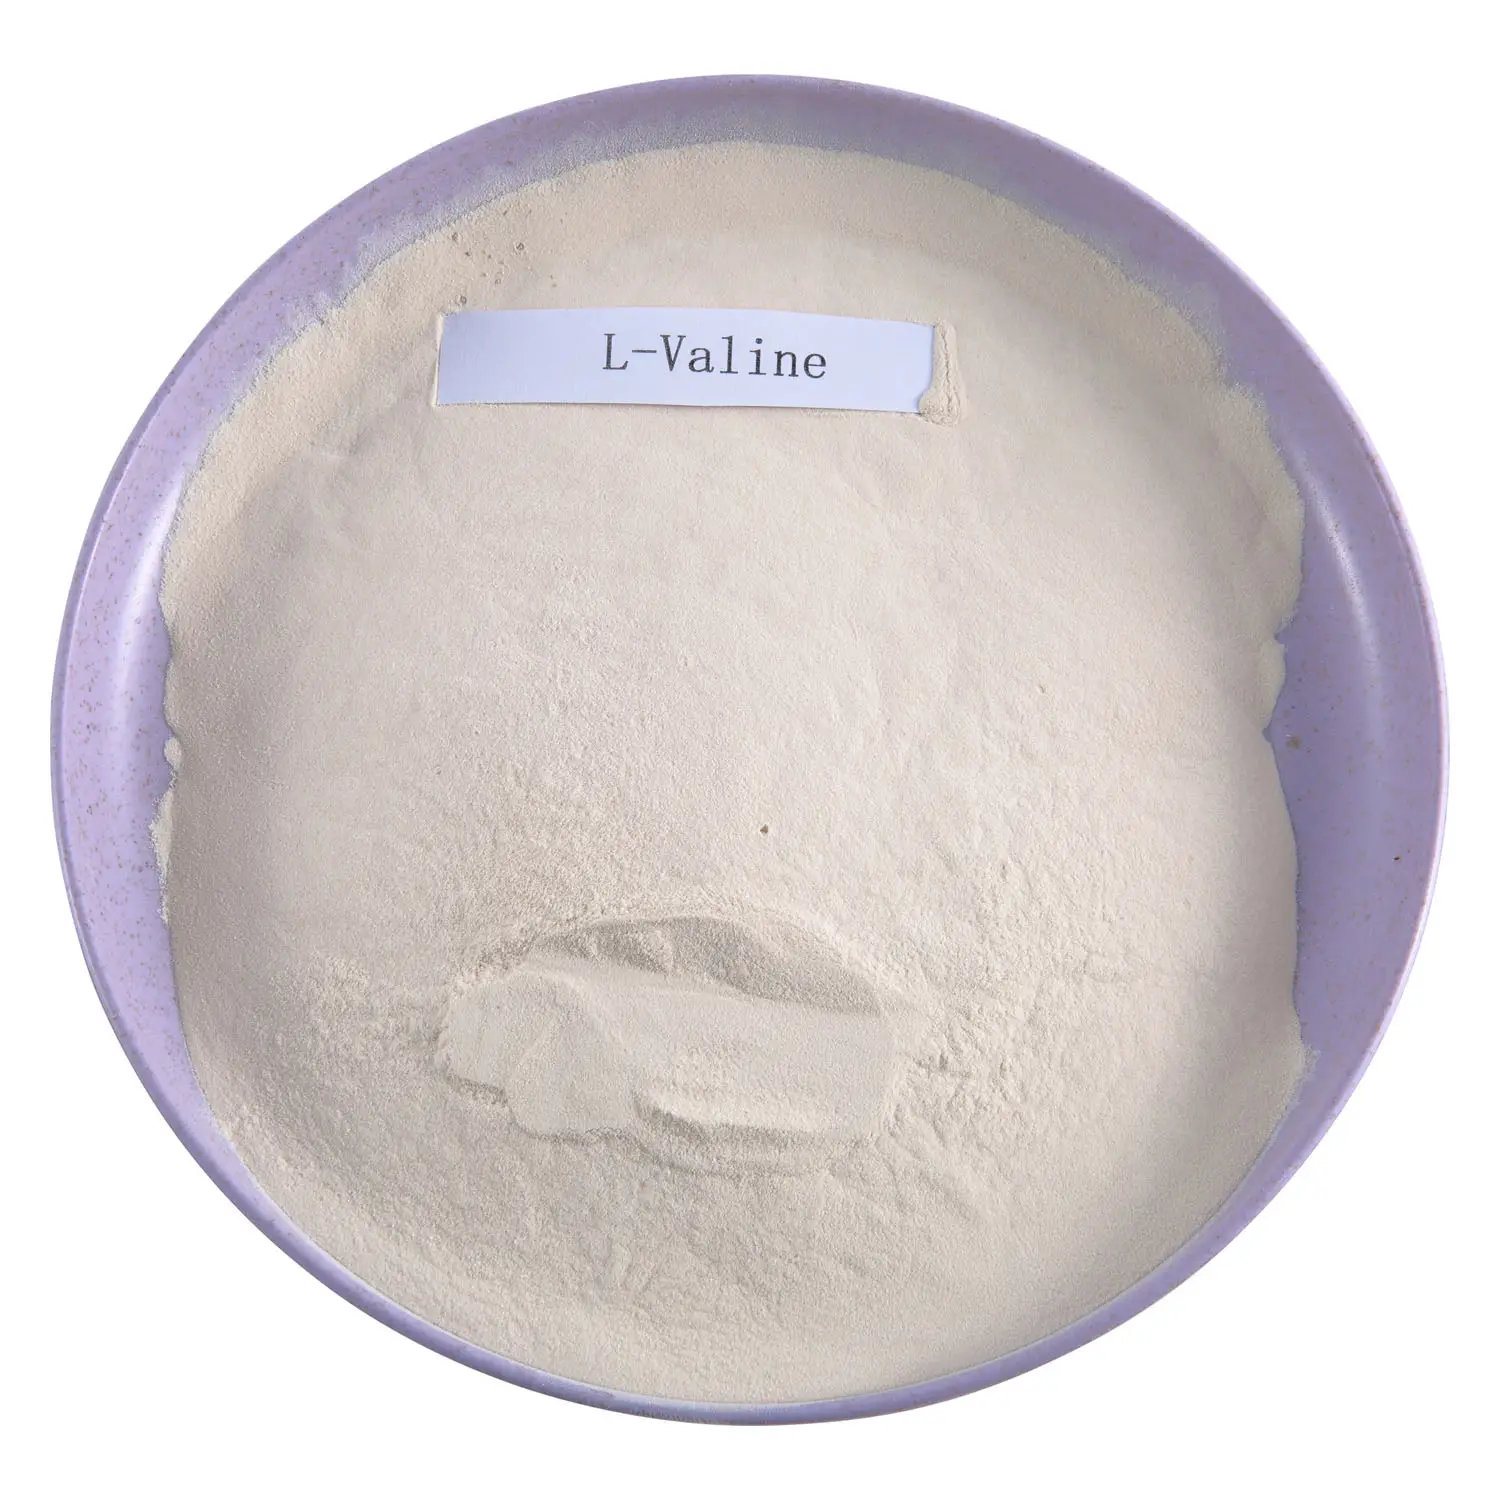 Amino Acids wholesale L-Valine Feed Grade l valine in poultry feed CAS: 72-18-4 l valine feed additive